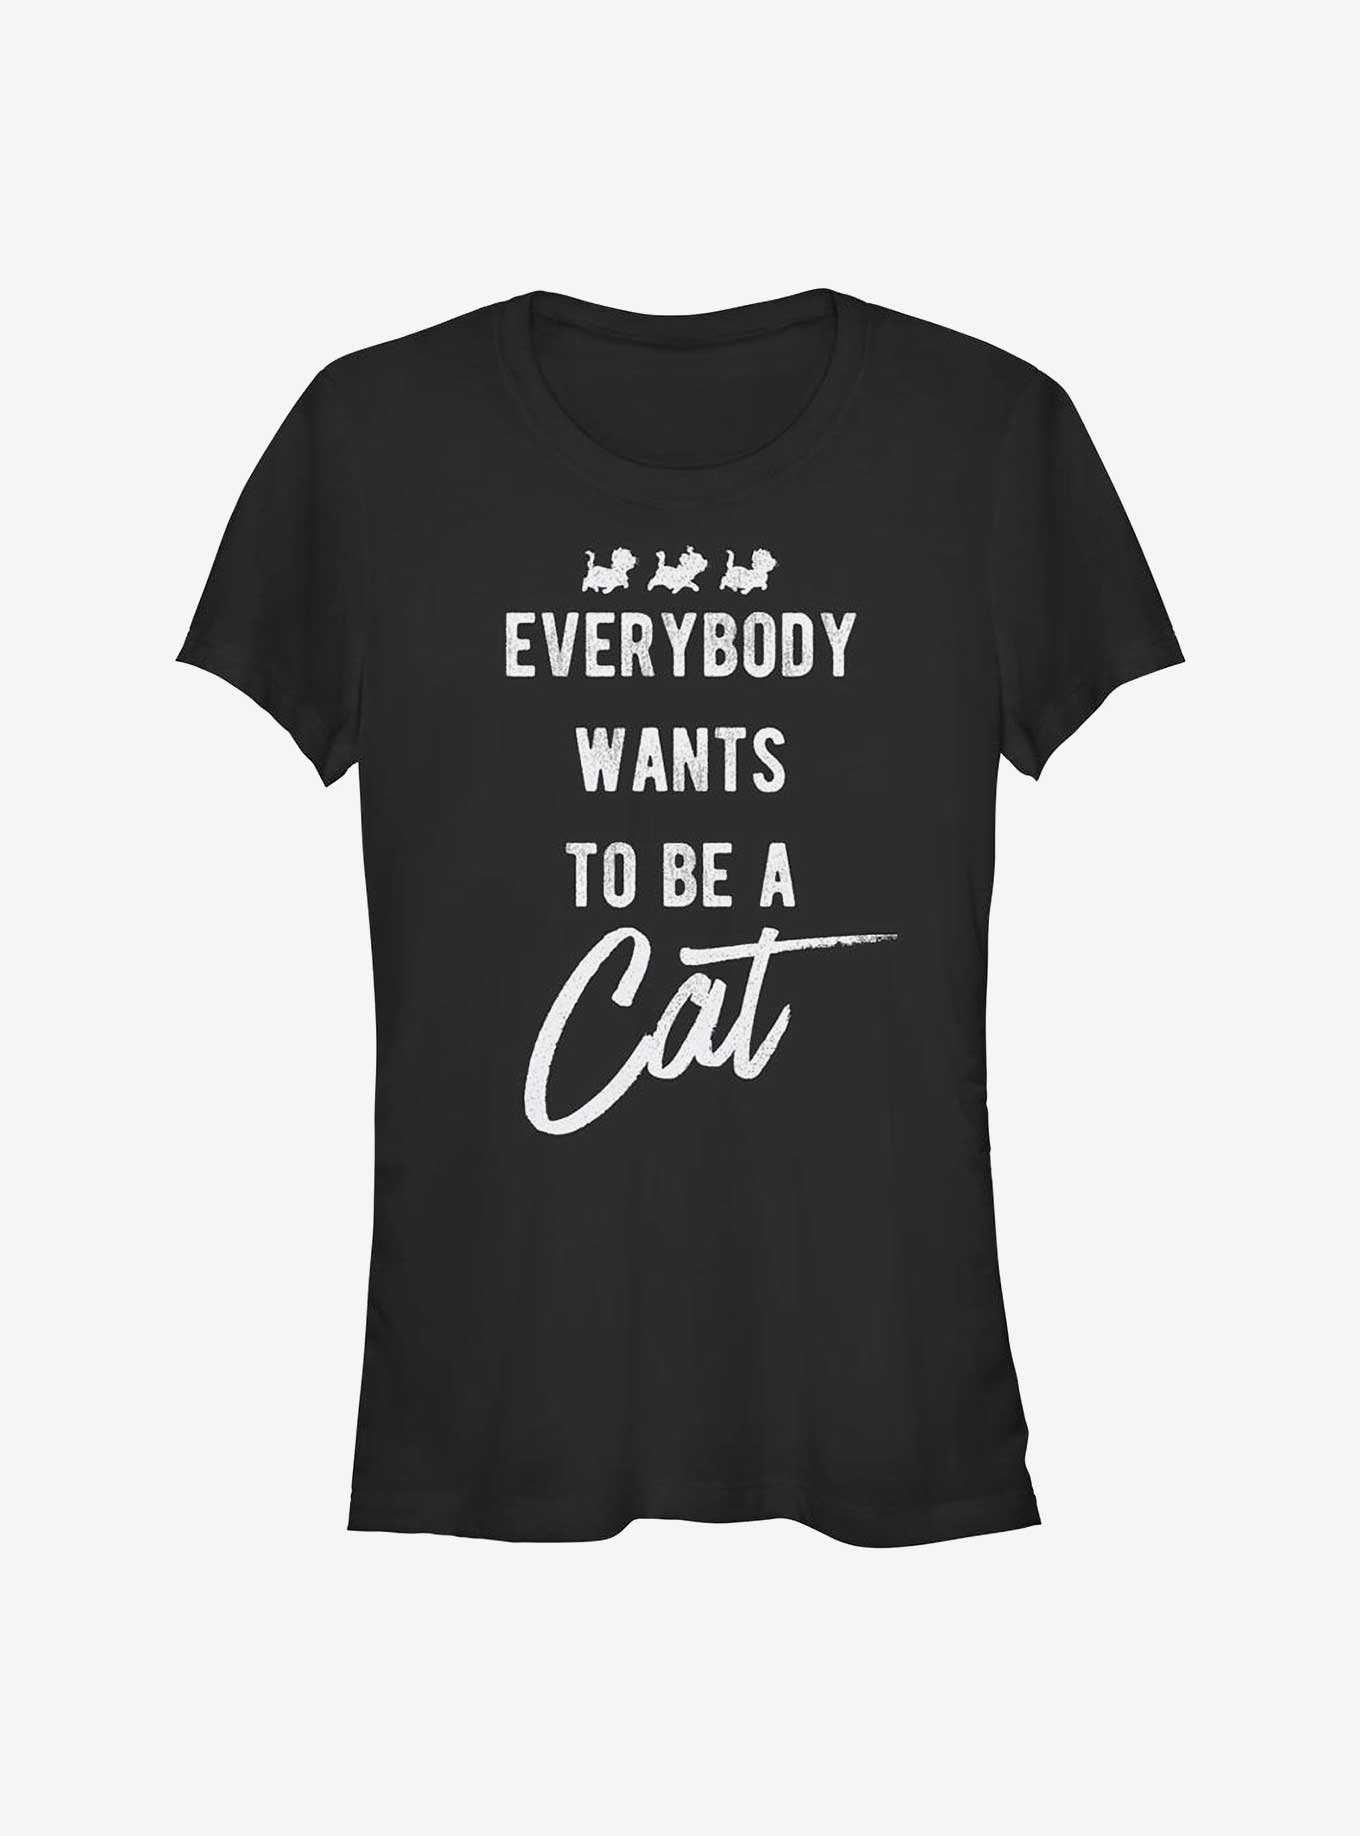 Disney The Aristocats Everbody Wants To Be A Cat Girls T-Shirt, BLACK, hi-res